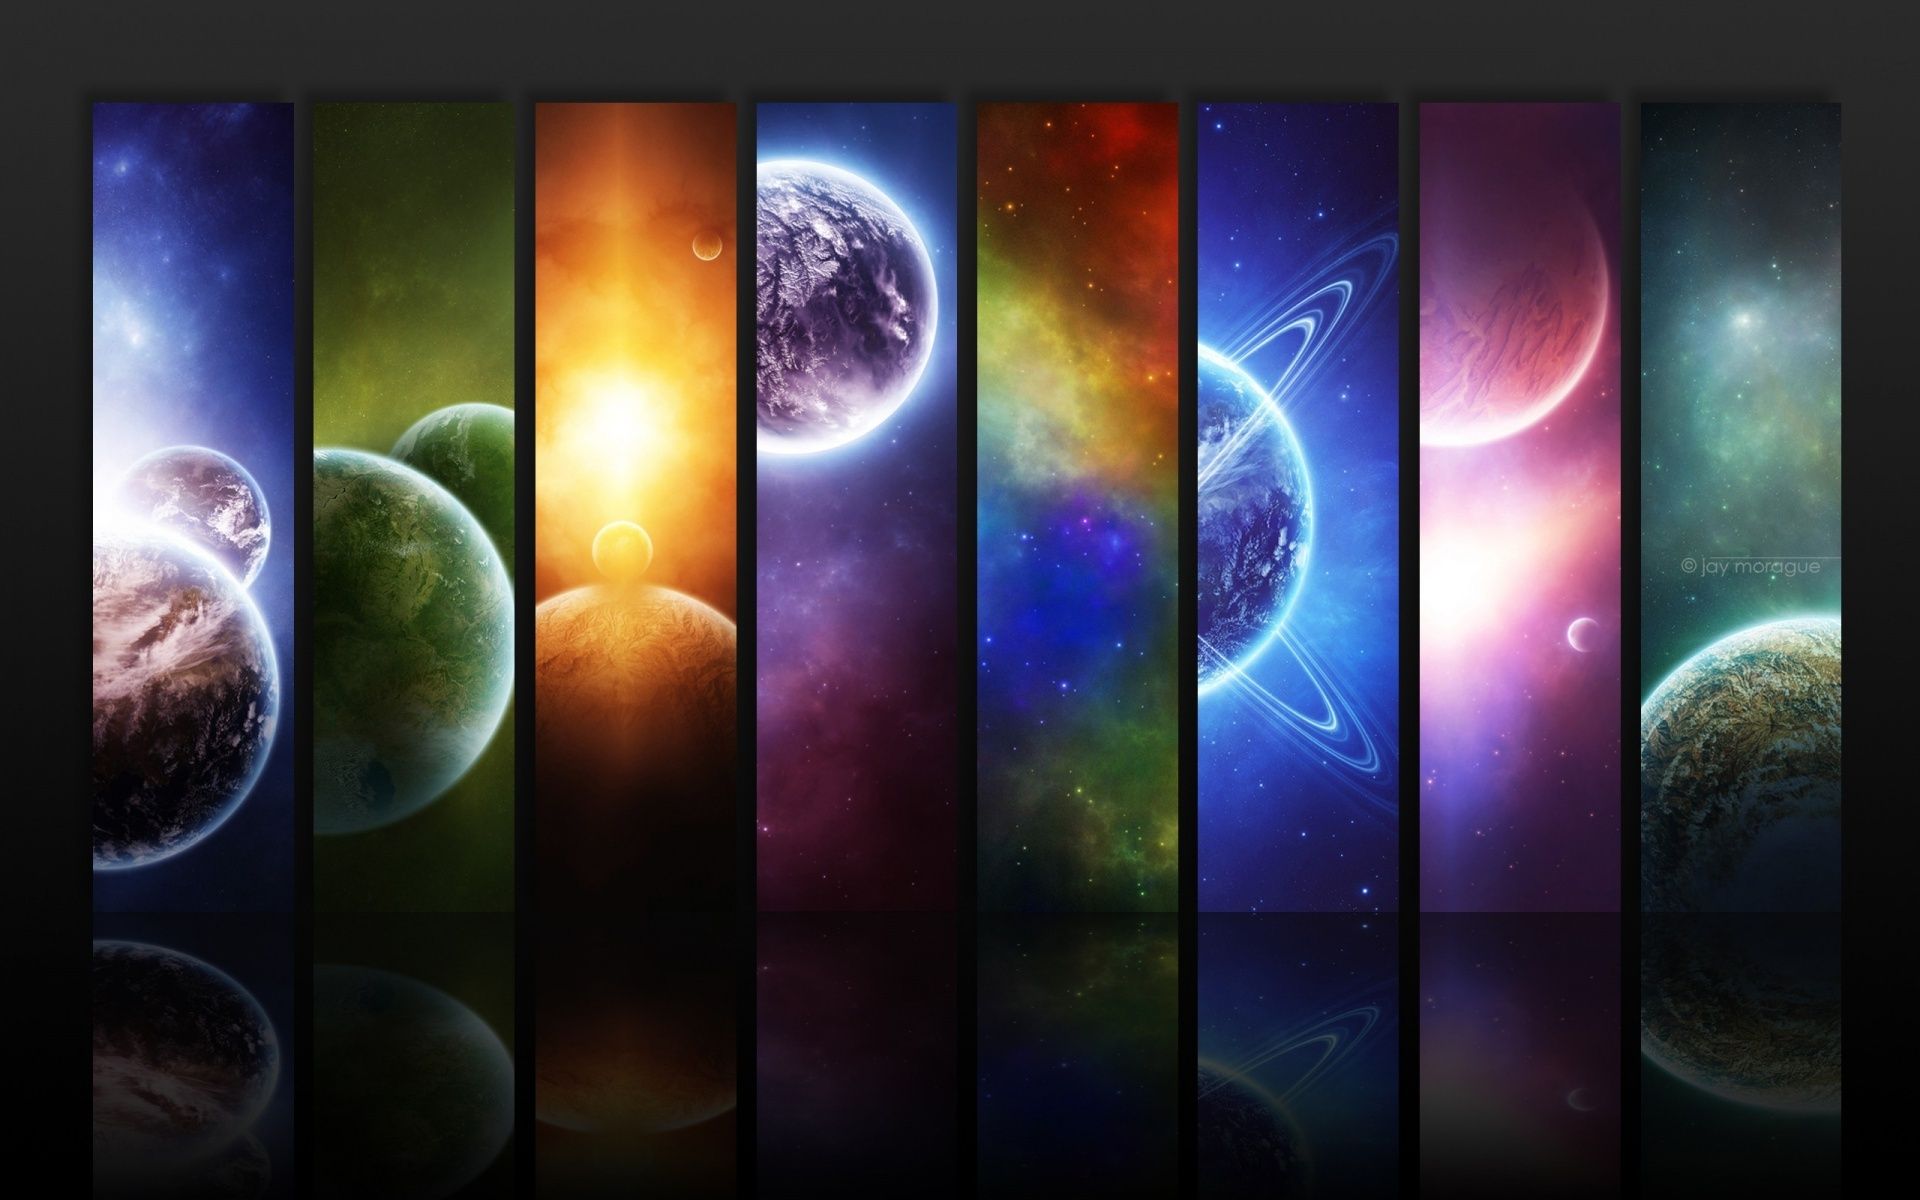 Desktop pictures of stars and planets wallpaper